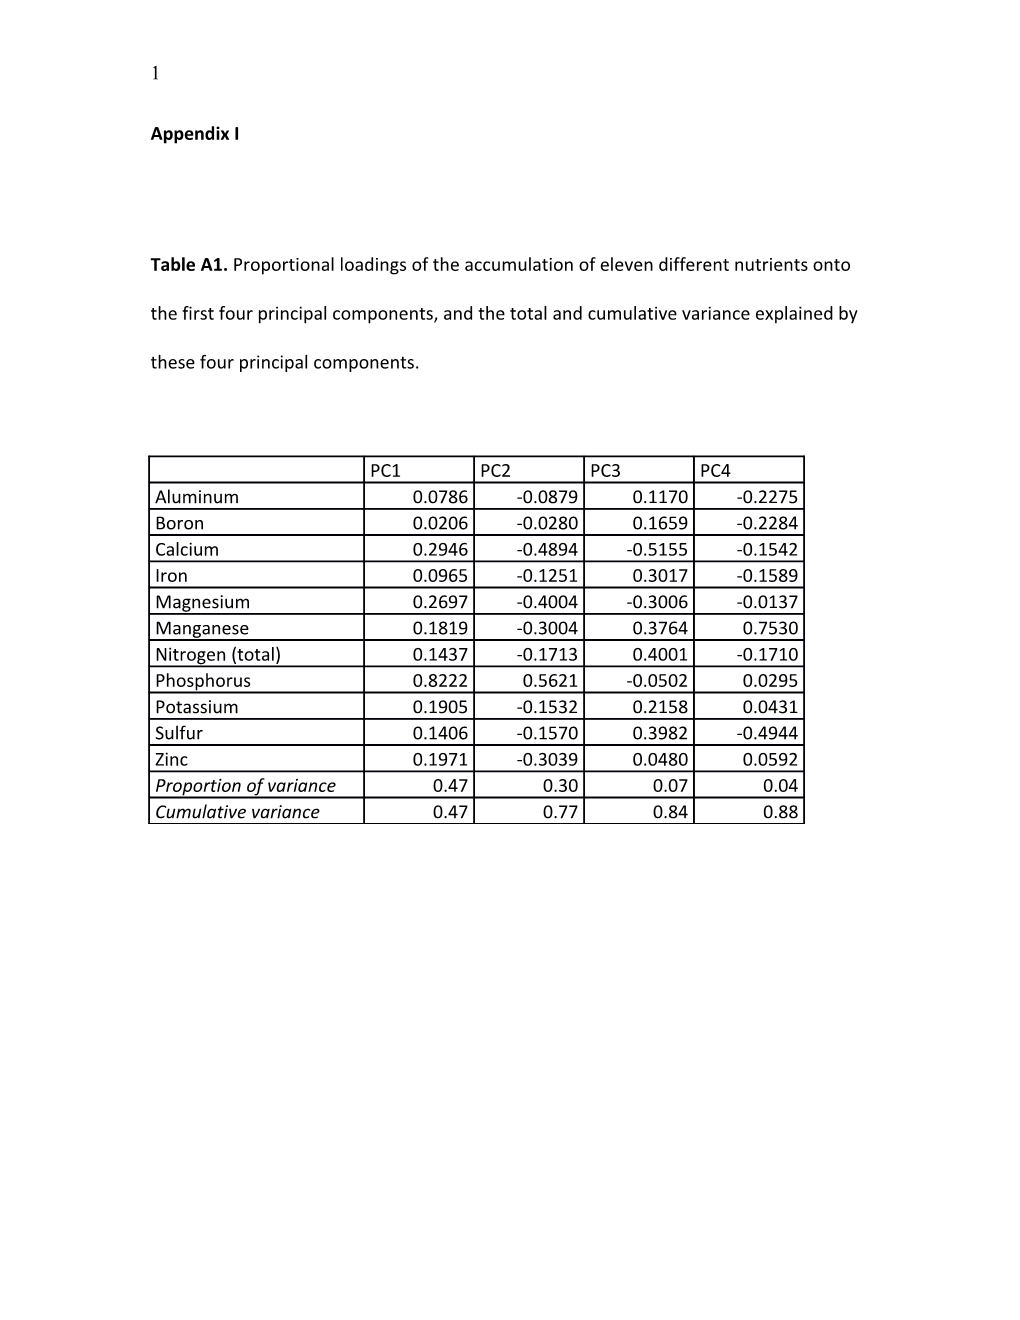 Table A1. Proportional Loadings of the Accumulation of Eleven Different Nutrients Onto